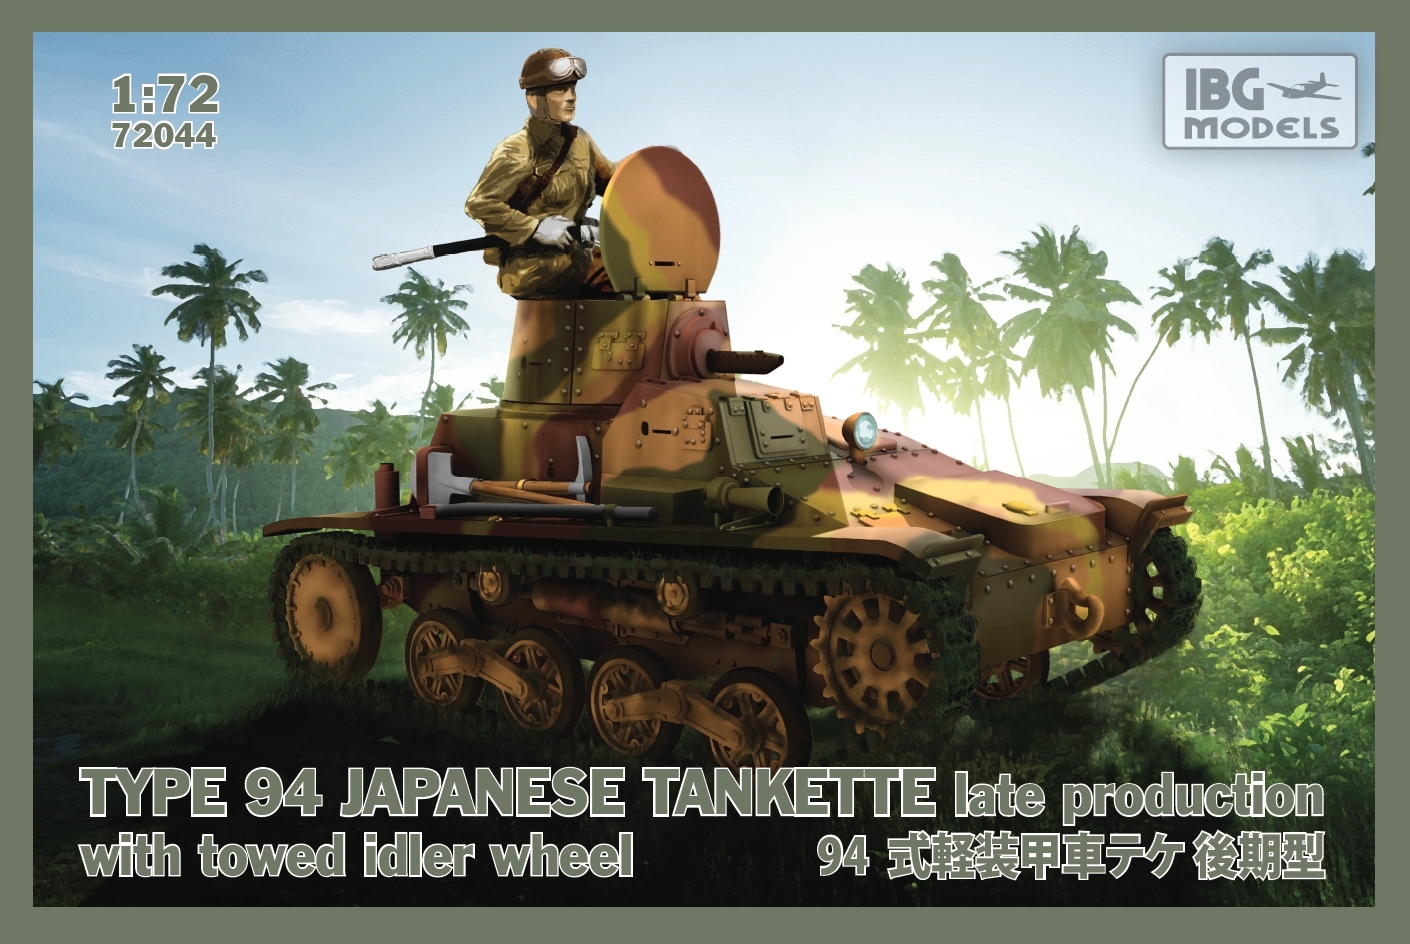 TYPE 94 Japanese Tankette - late, with towed idler wheel